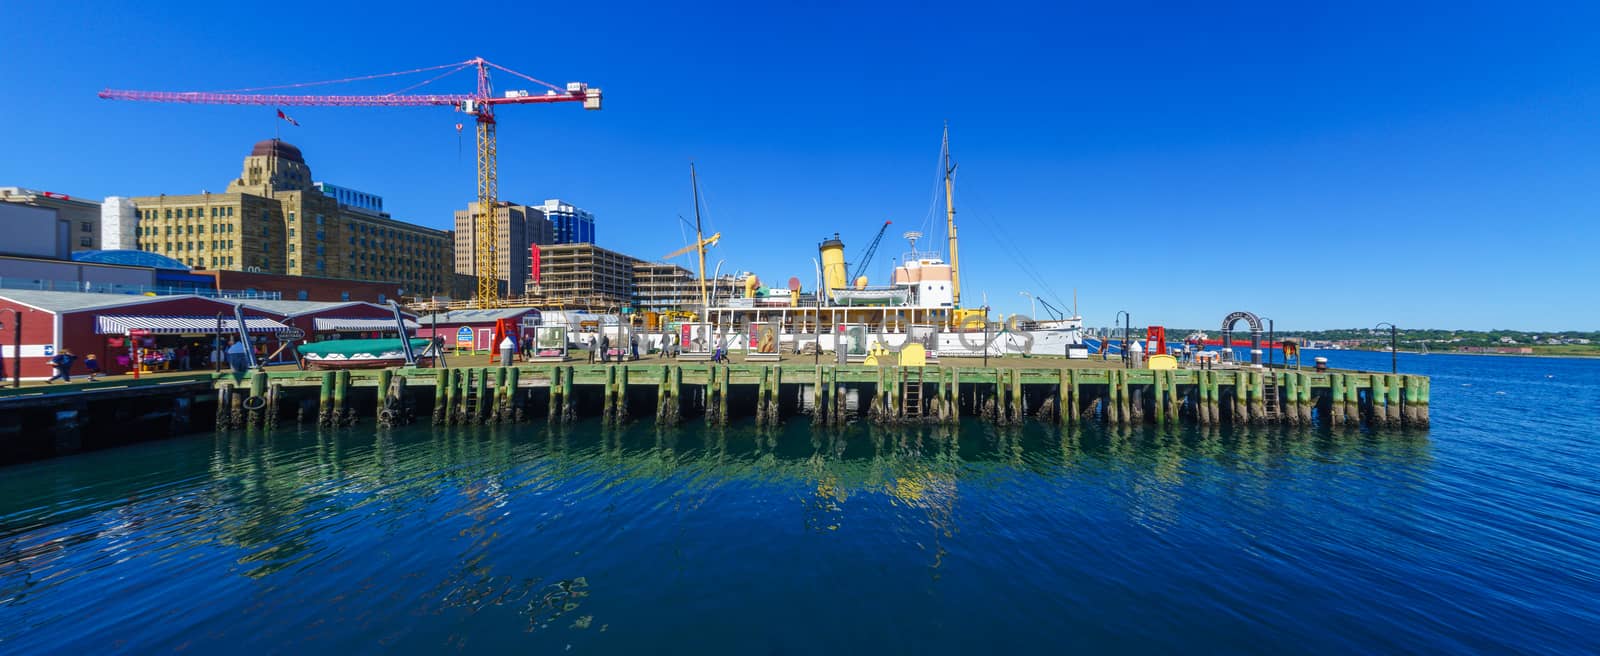 Halifax, Canada - September 23, 2018: Panoramic view of the harbor and the downtown, with locals and visitors, in Halifax, Nova Scotia, Canada